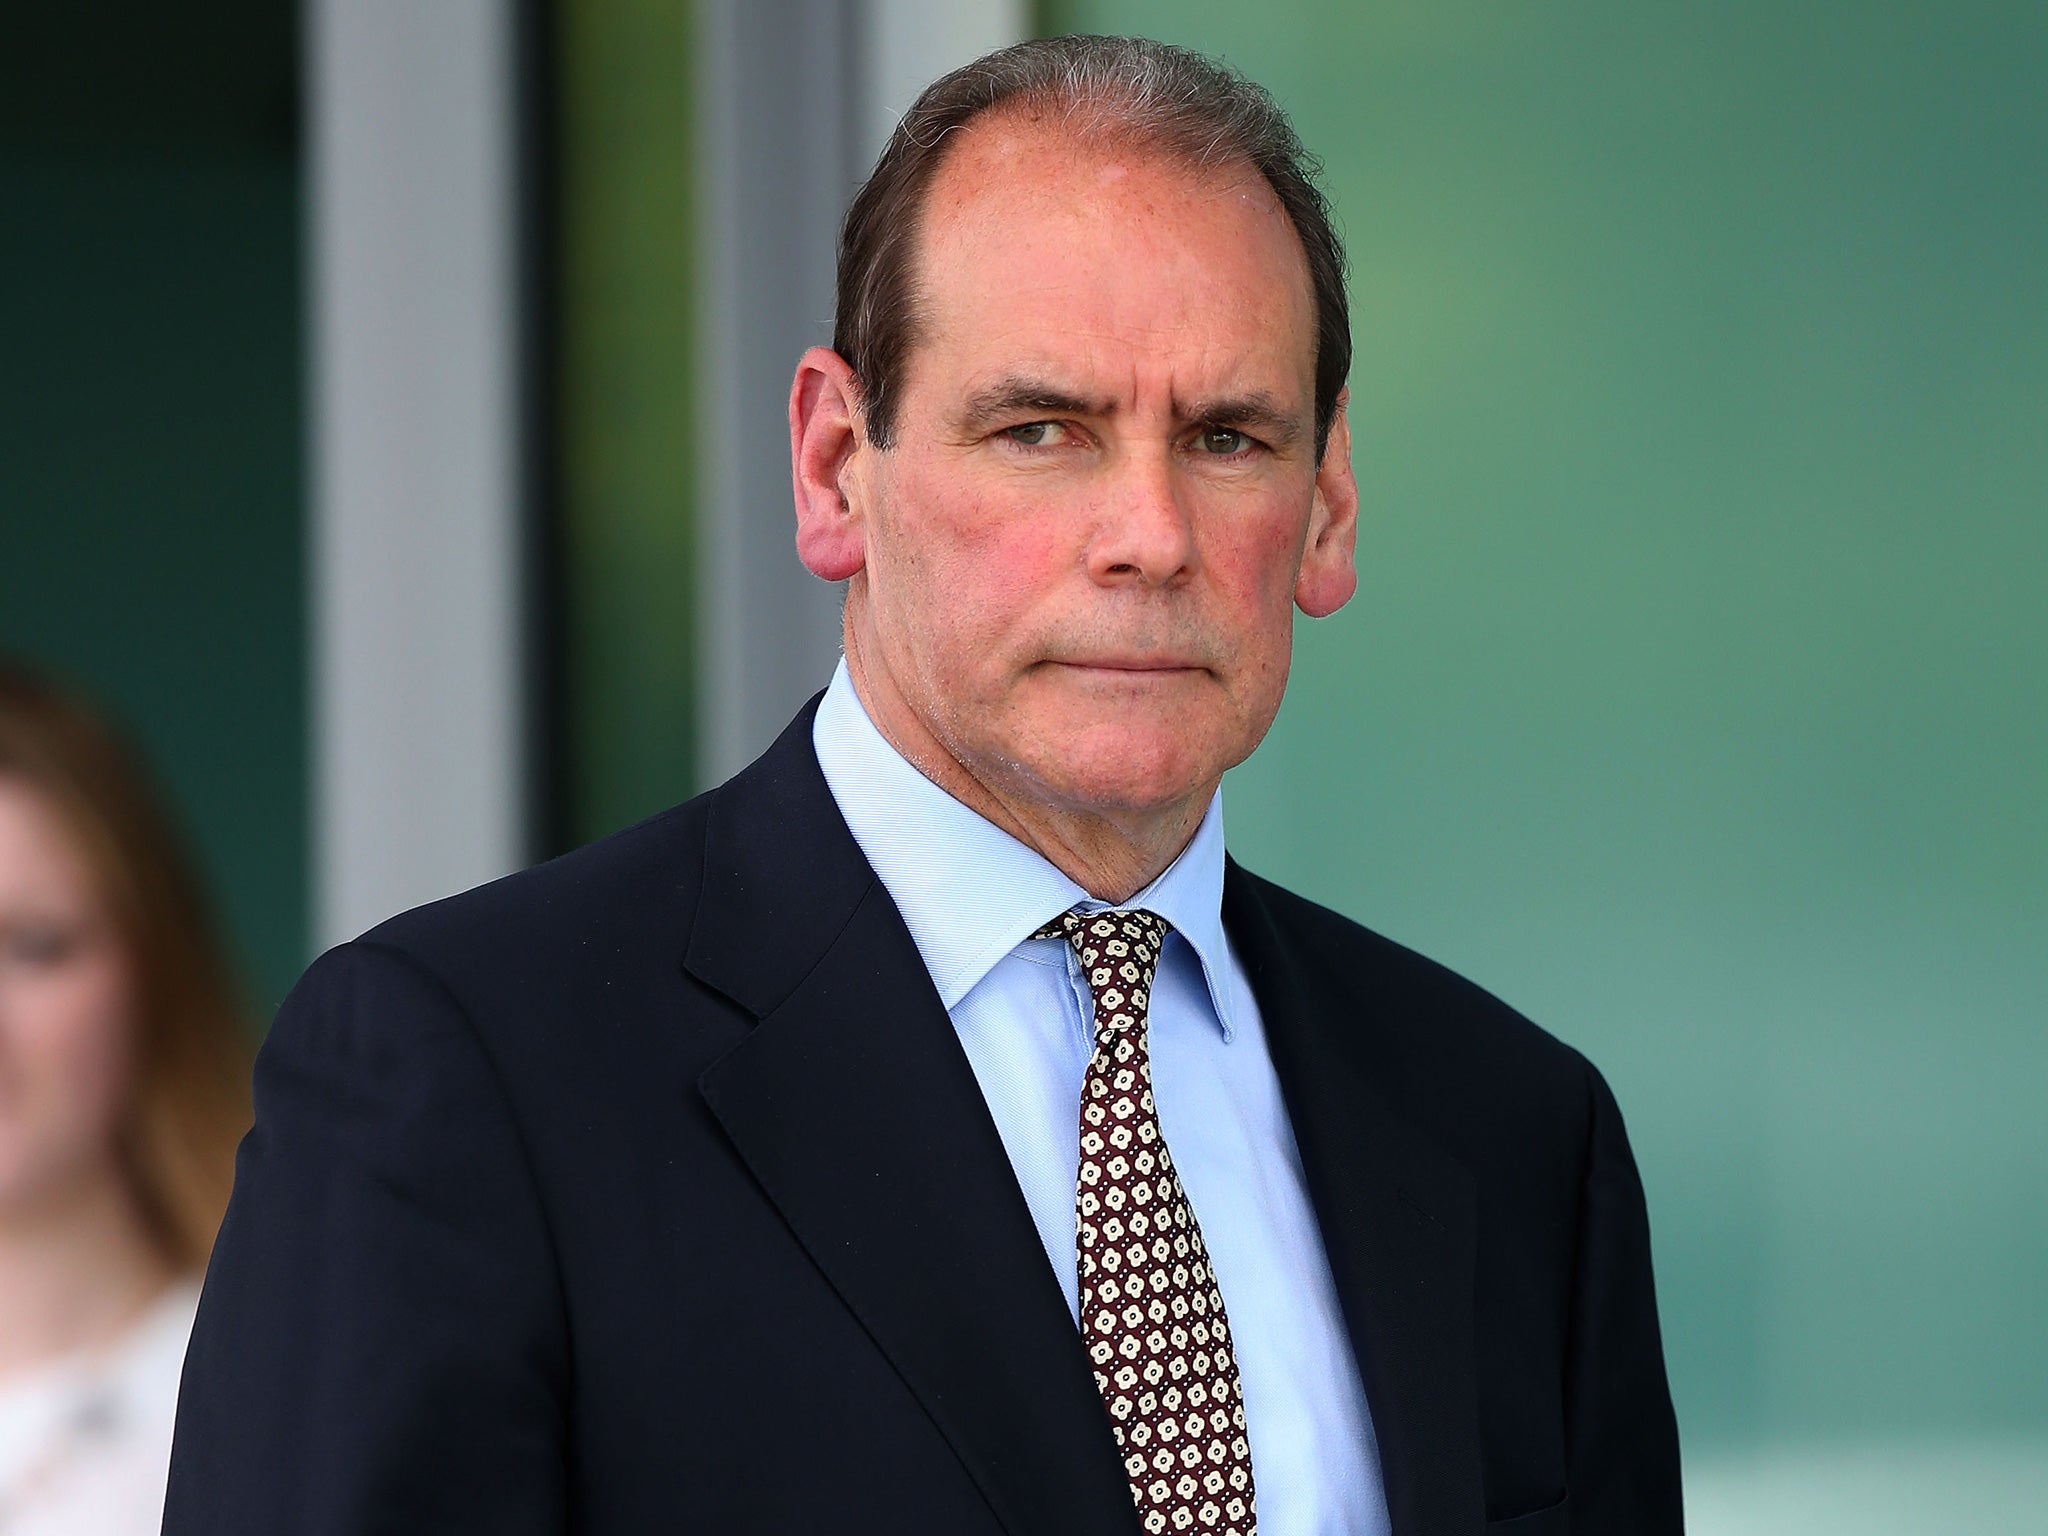 Sir Norman Bettison is the most senior police figure to give evidence to the inquests